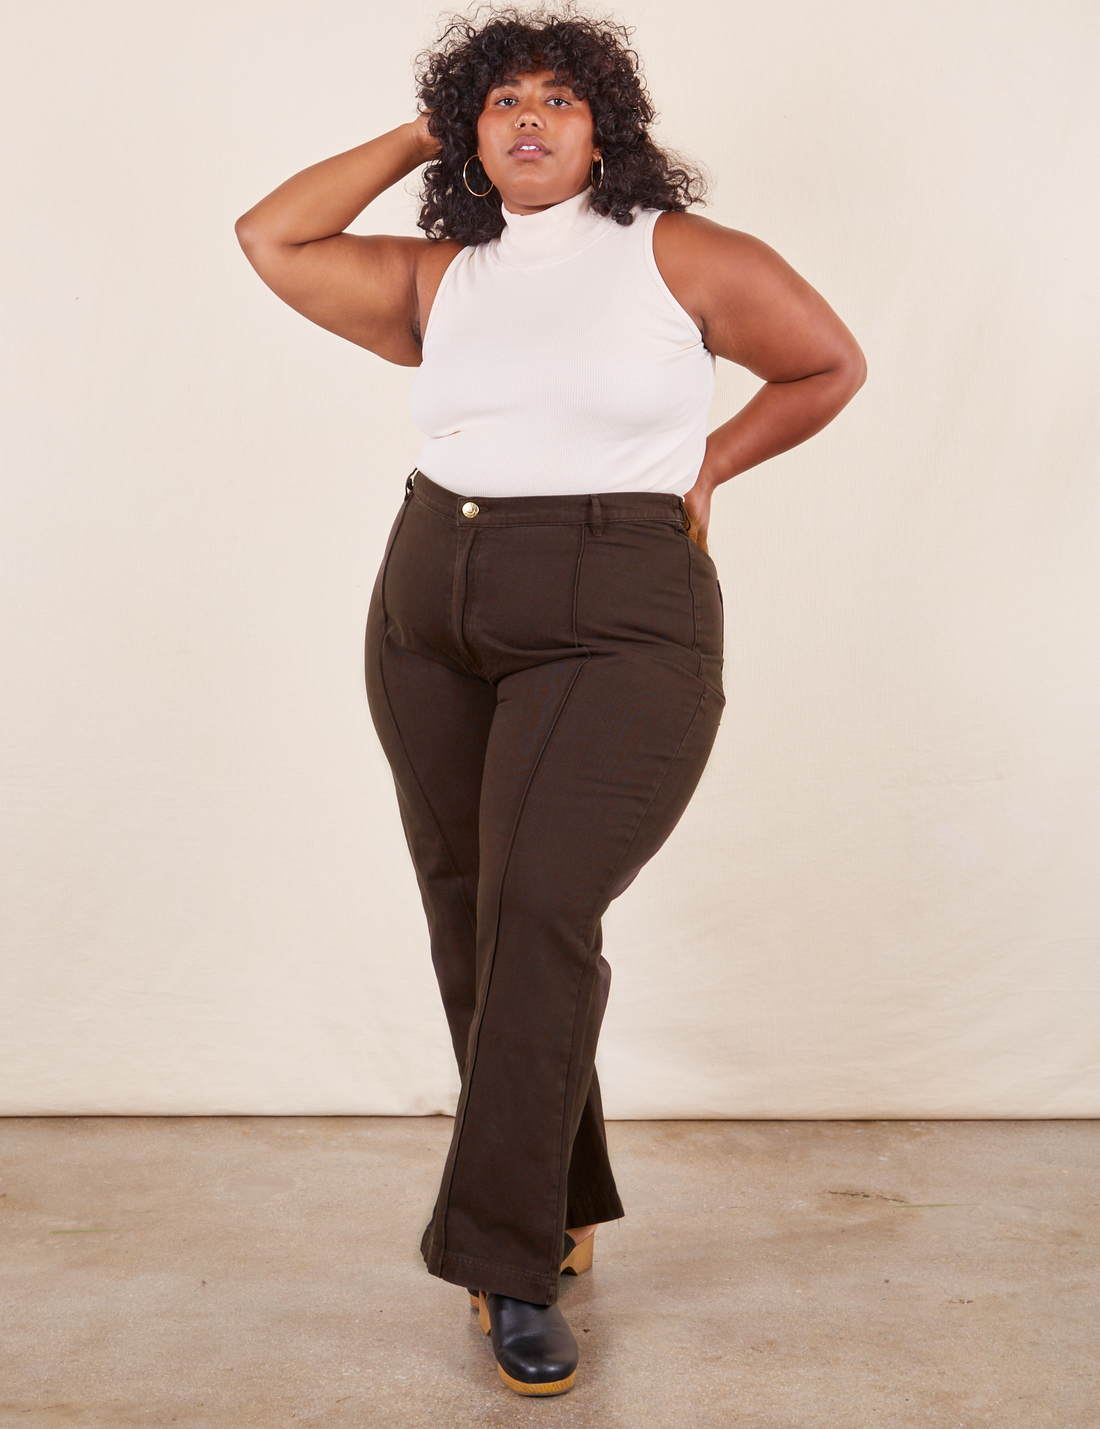 Morgan is 5'5" and wearing 1XL Western Pants in Espresso Brown paired with vintage off-white Sleeveless Turtleneck